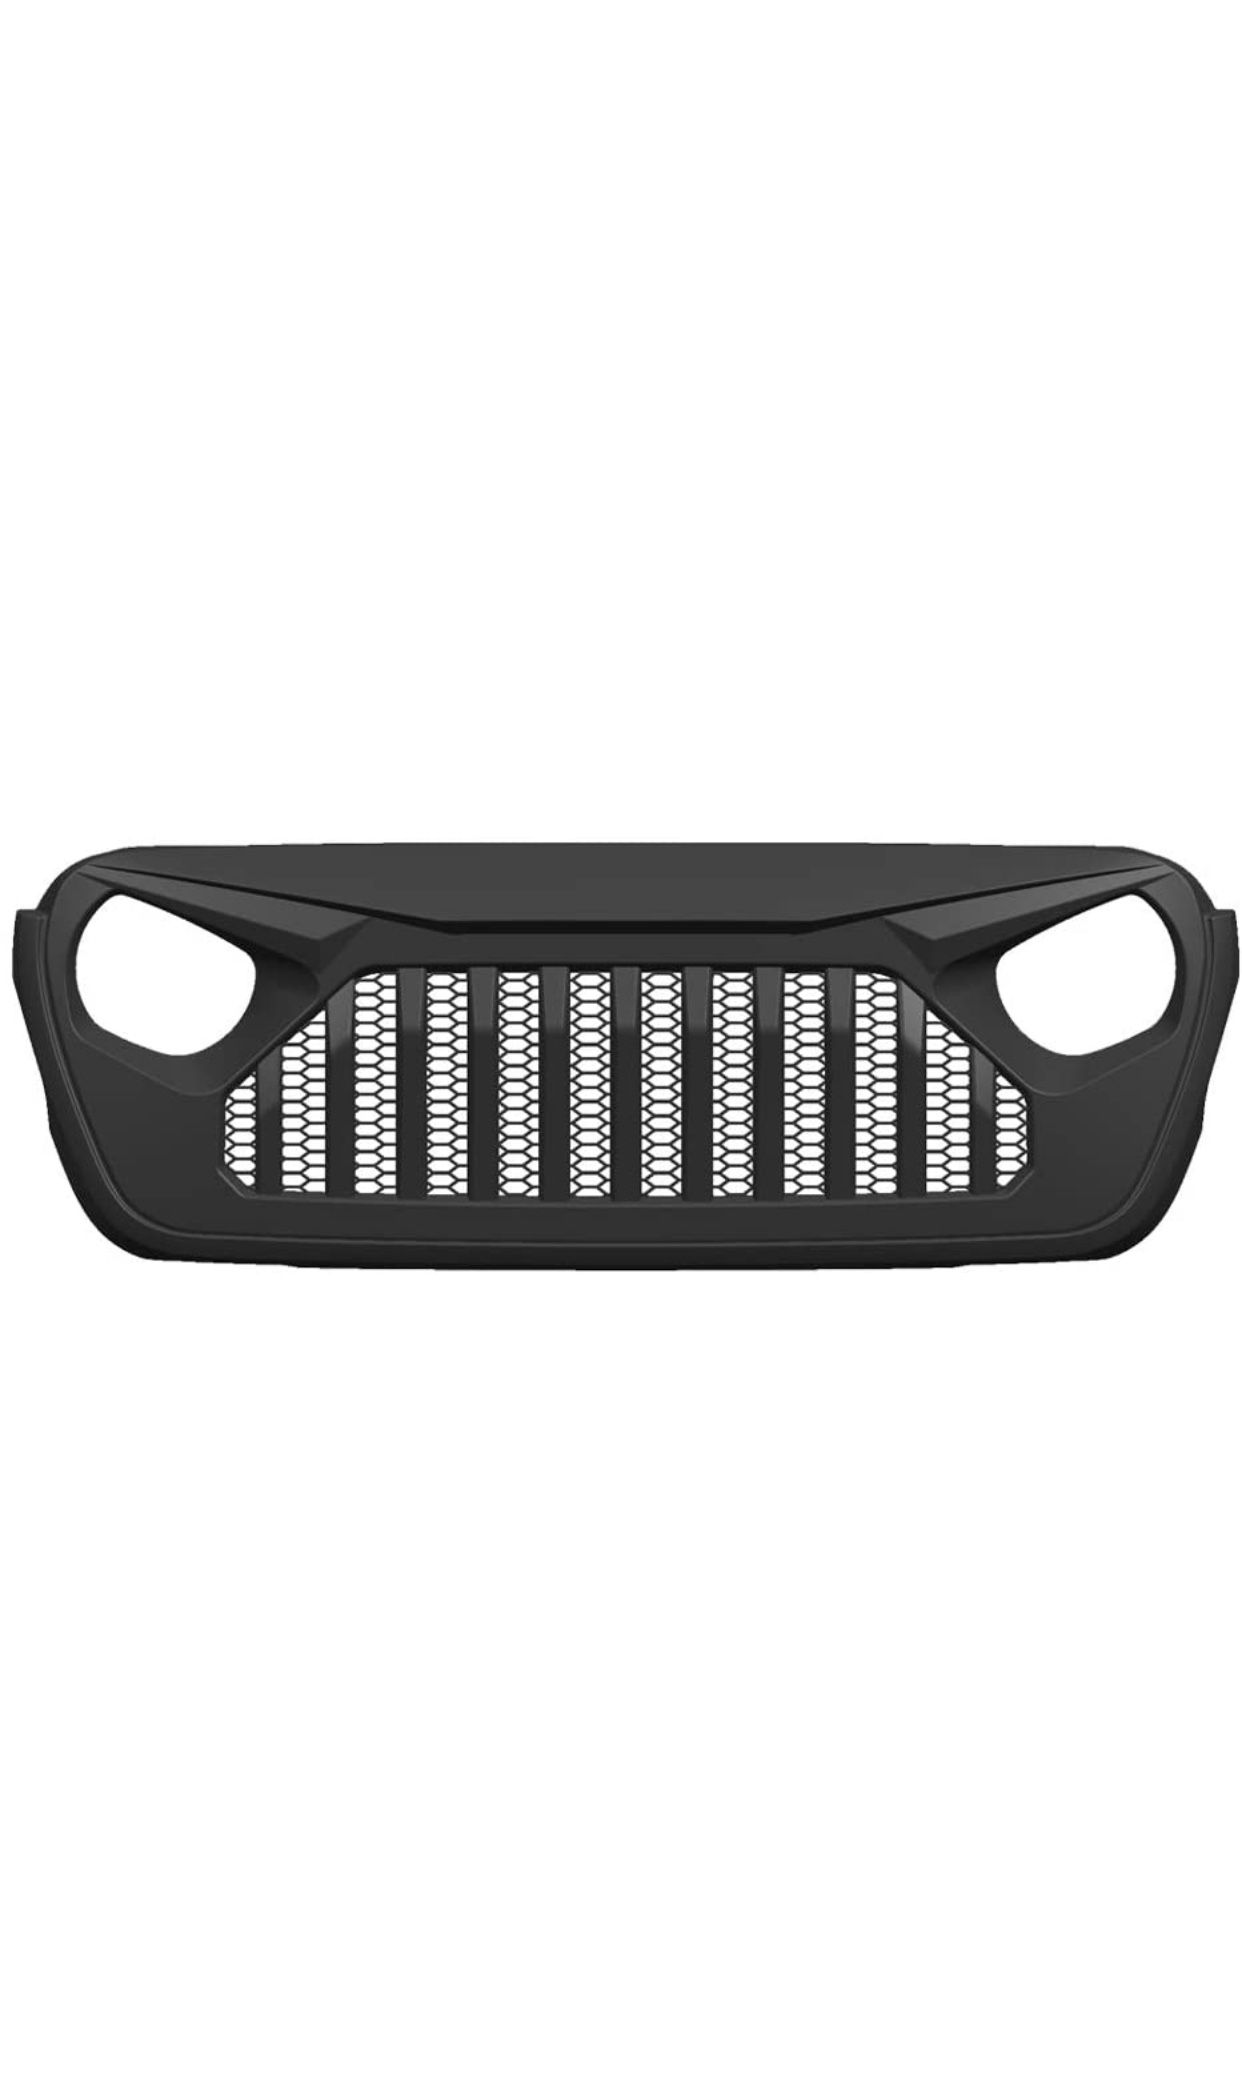 American 4wheel Matte Black Gladiator Vader Grill Front Cover for Jeep Wrangler 2018 2019 2020 JL JLU & Unlimited Rubicon Sahara Sports, ABS